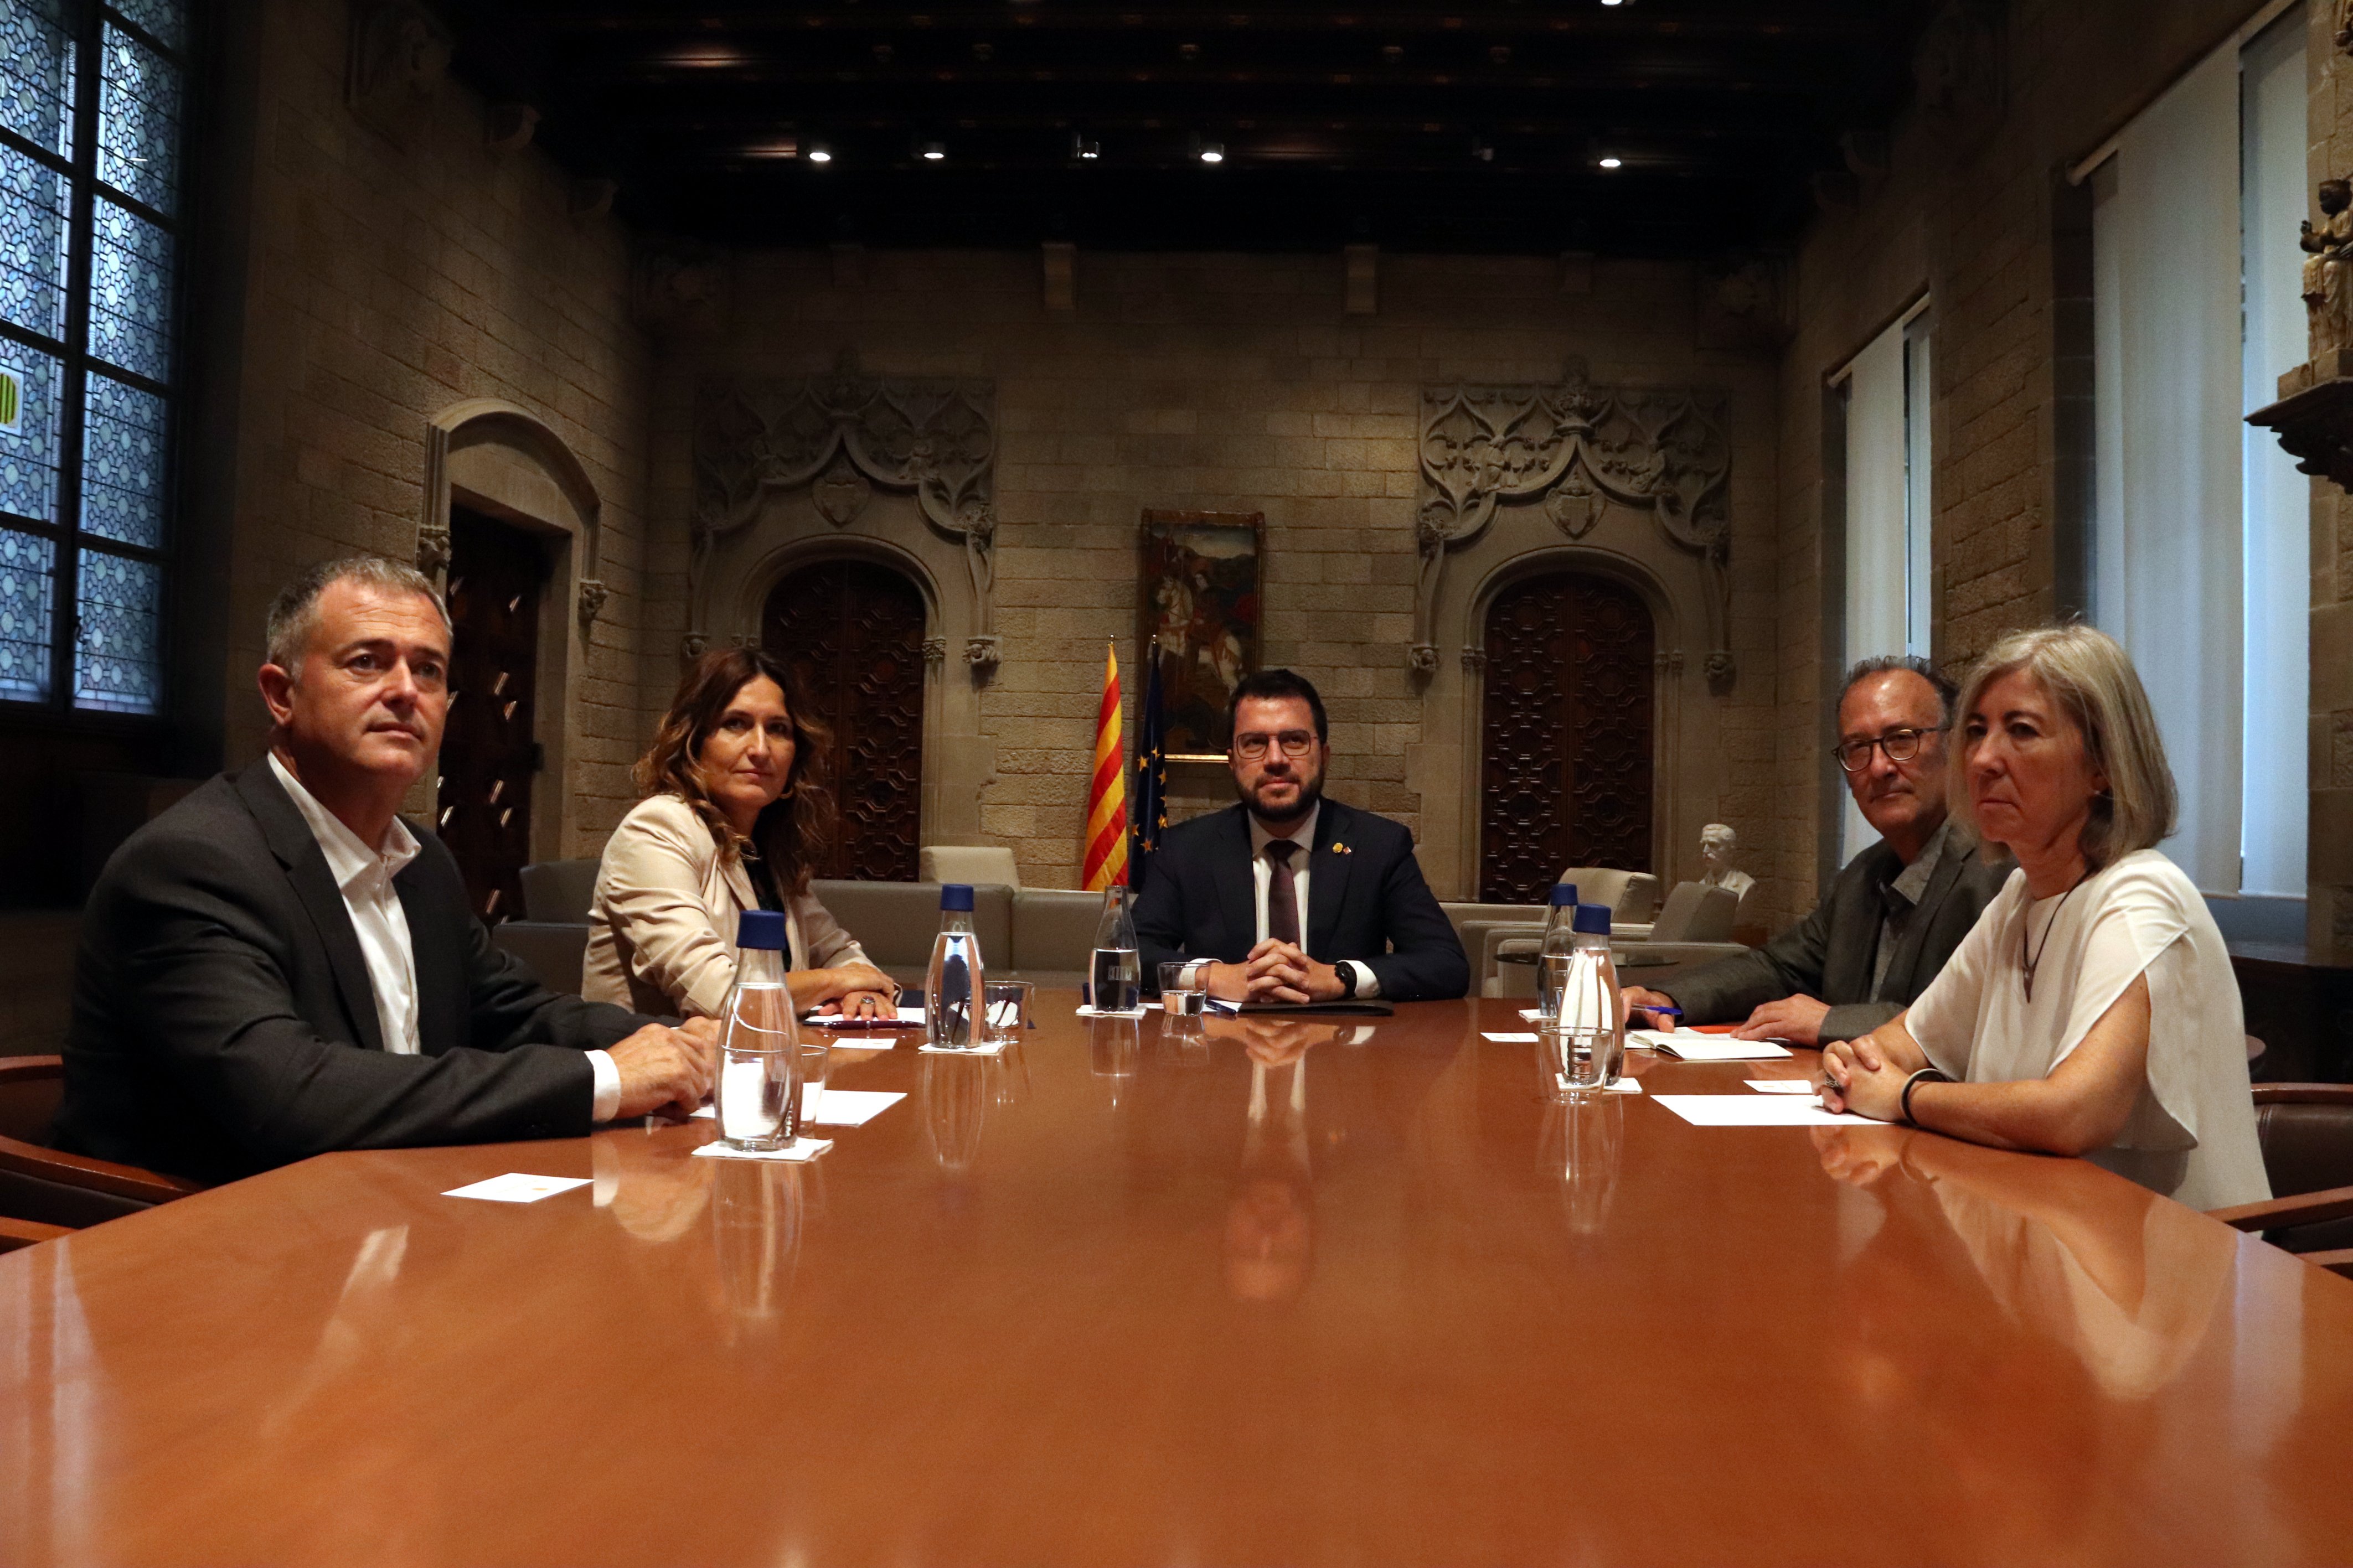 Aragonès closes door on ANC plan to make Catalan independence effective in 2023